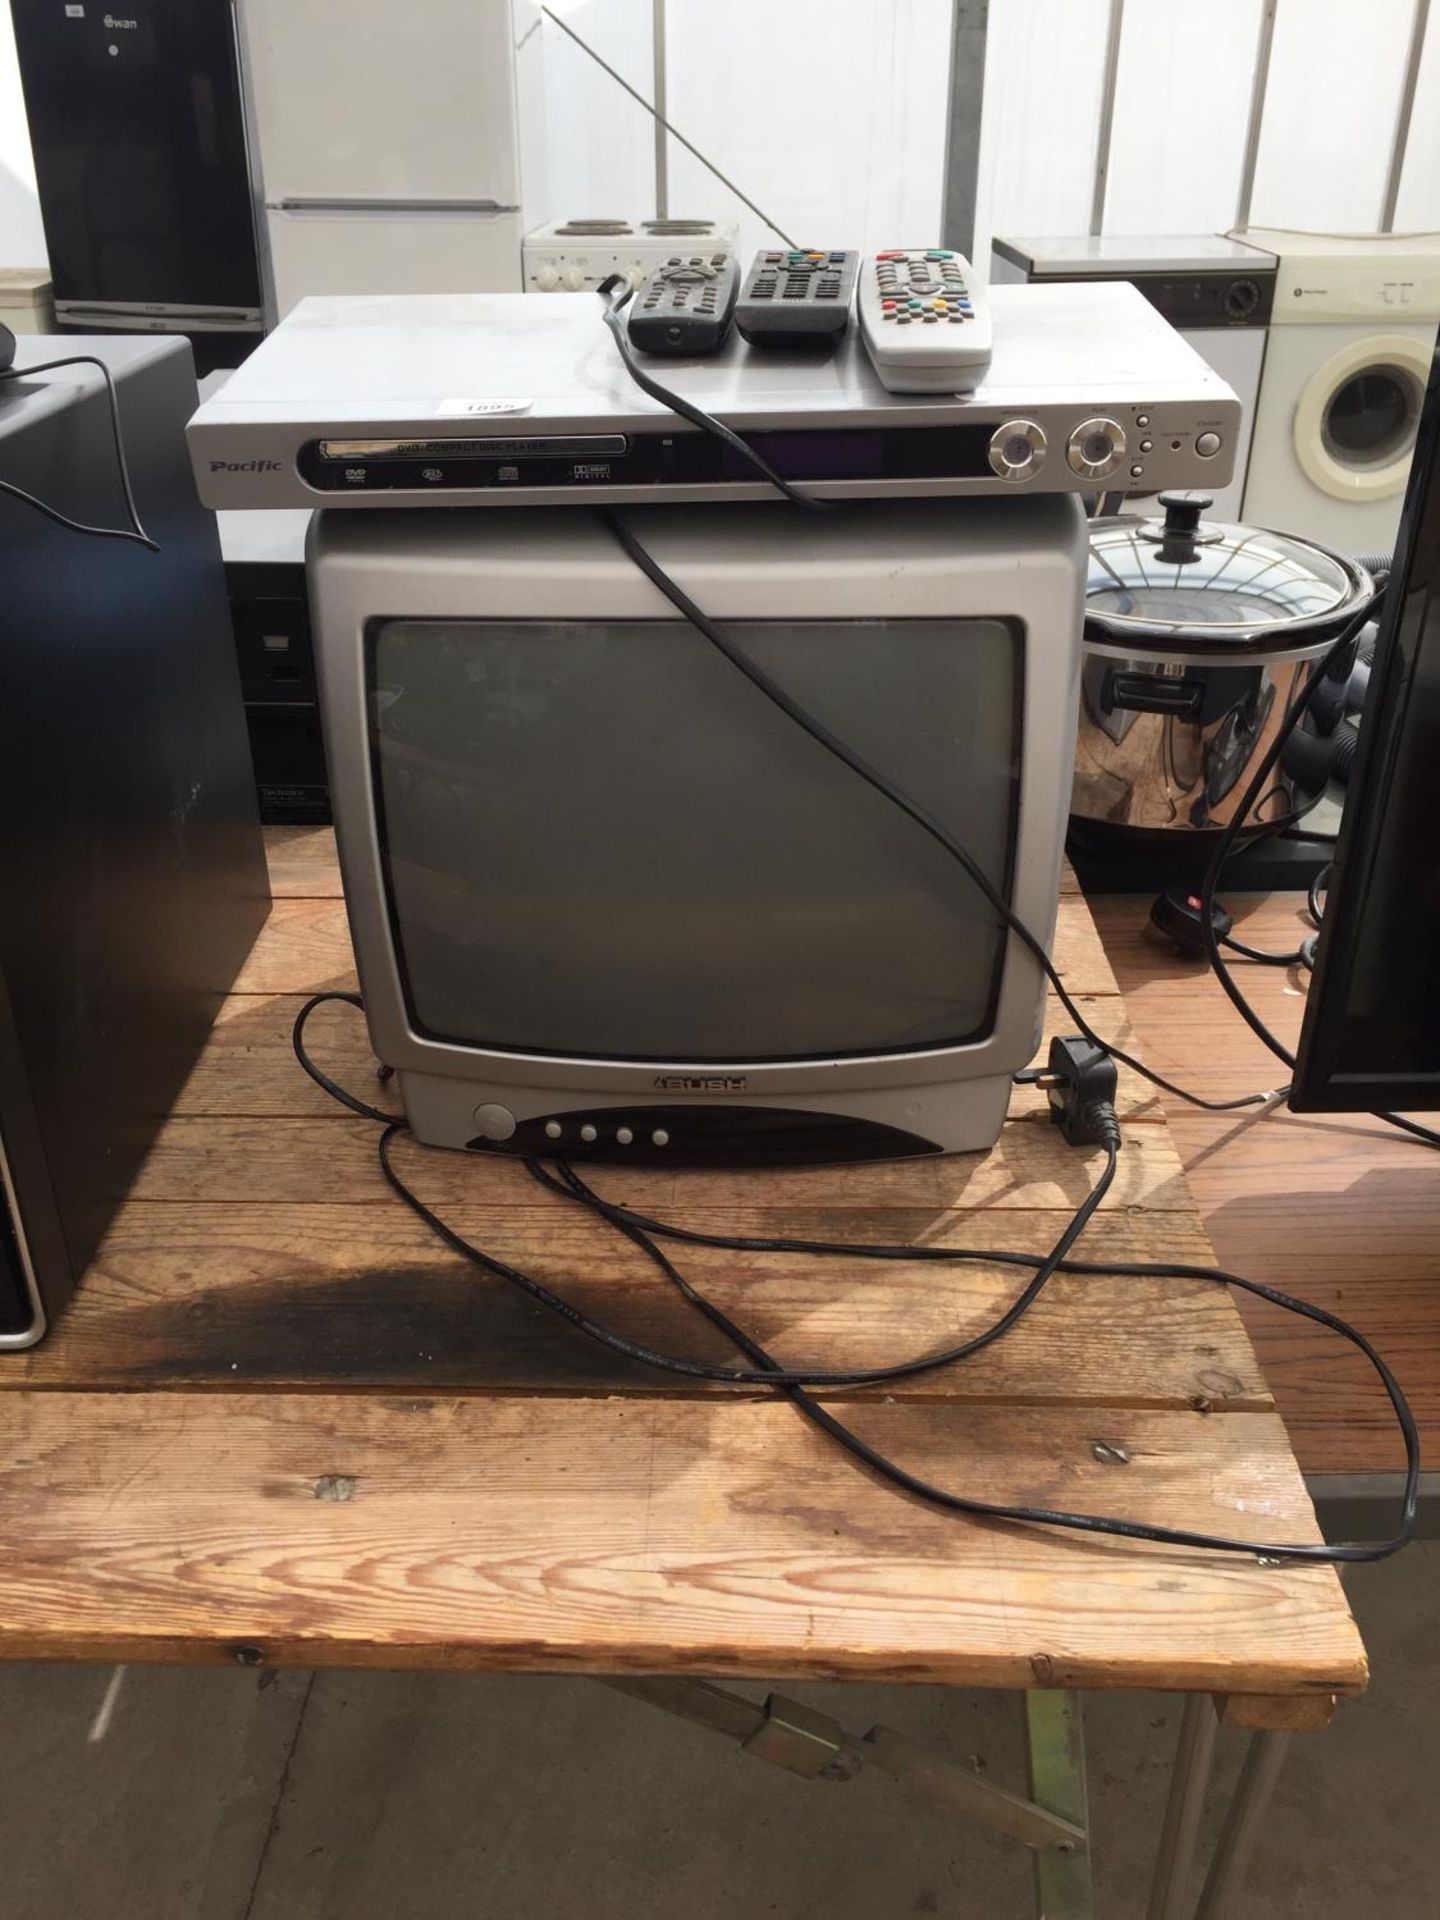 A BUSH TELEVISION AND A PACIFIC DVD PLAYER